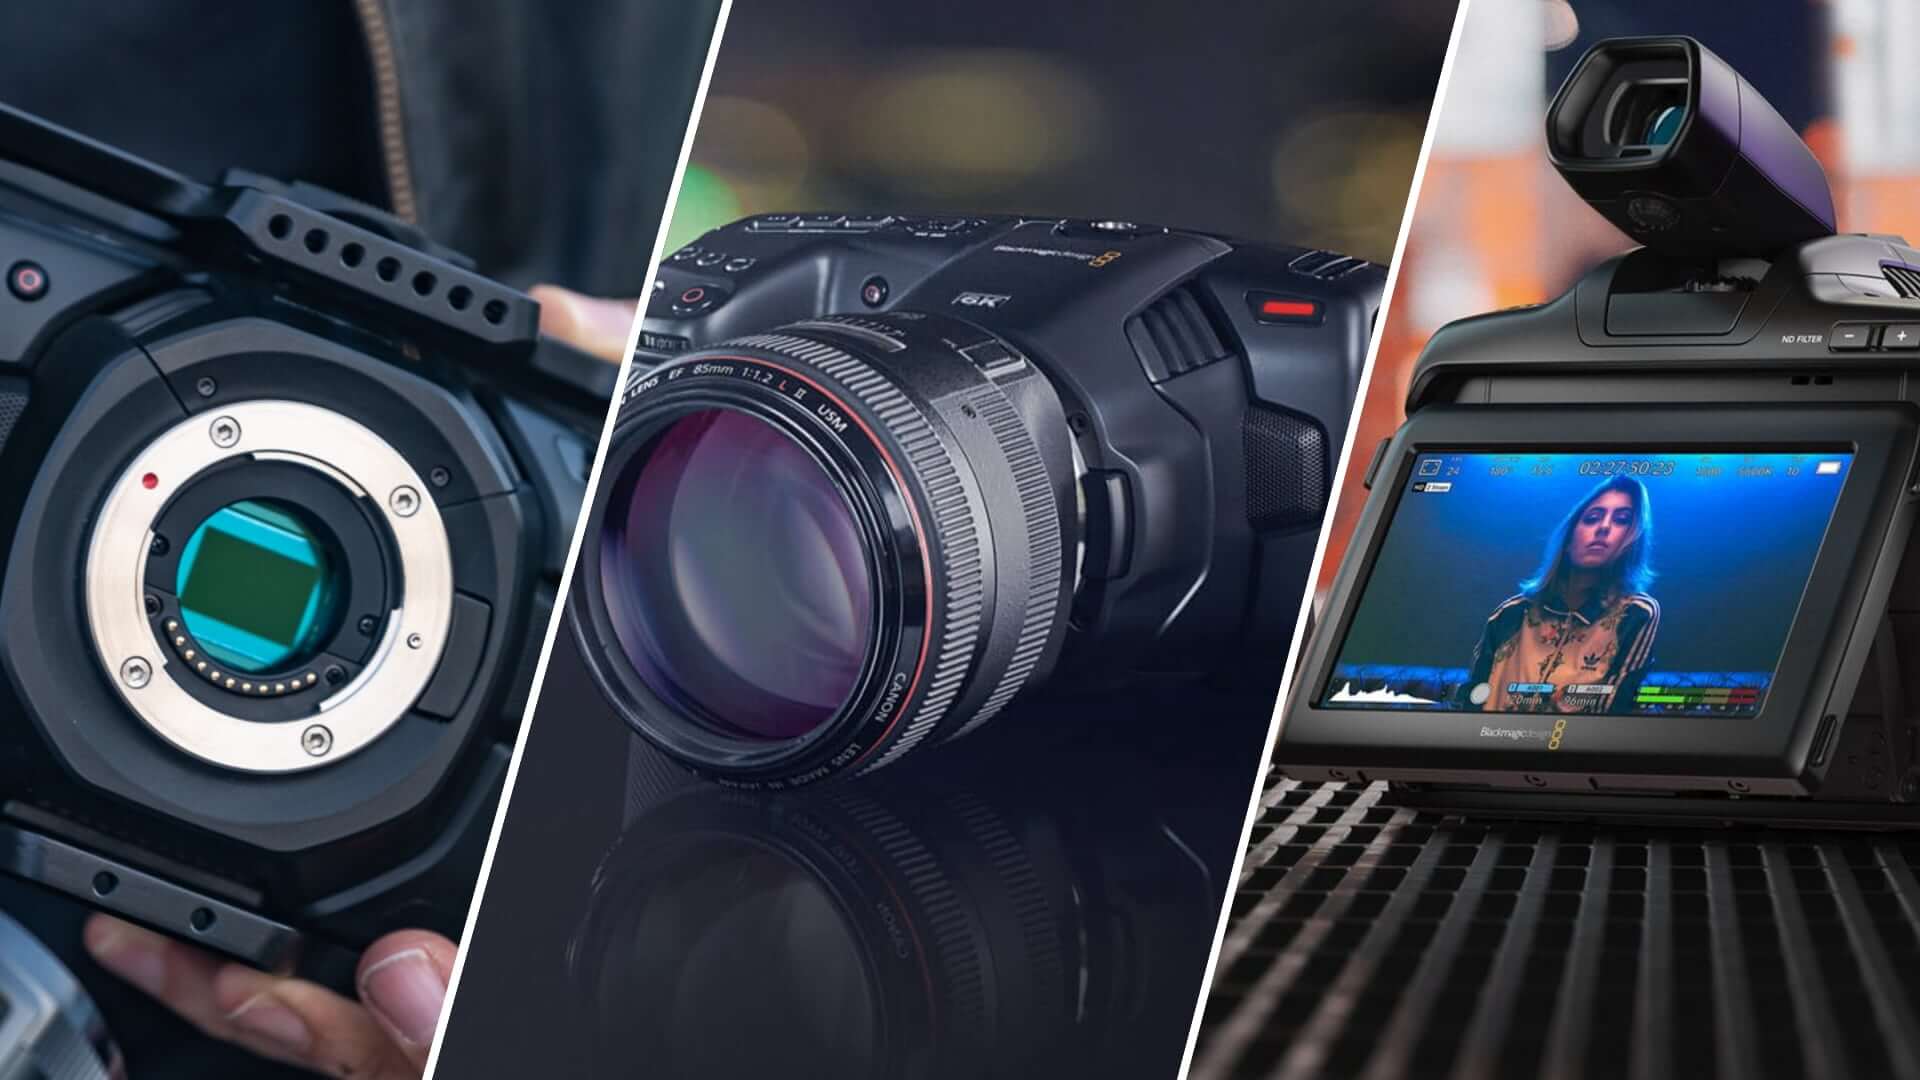 Top 10 Essential Accessories for the Ultimate BMPCC 6K Pro or